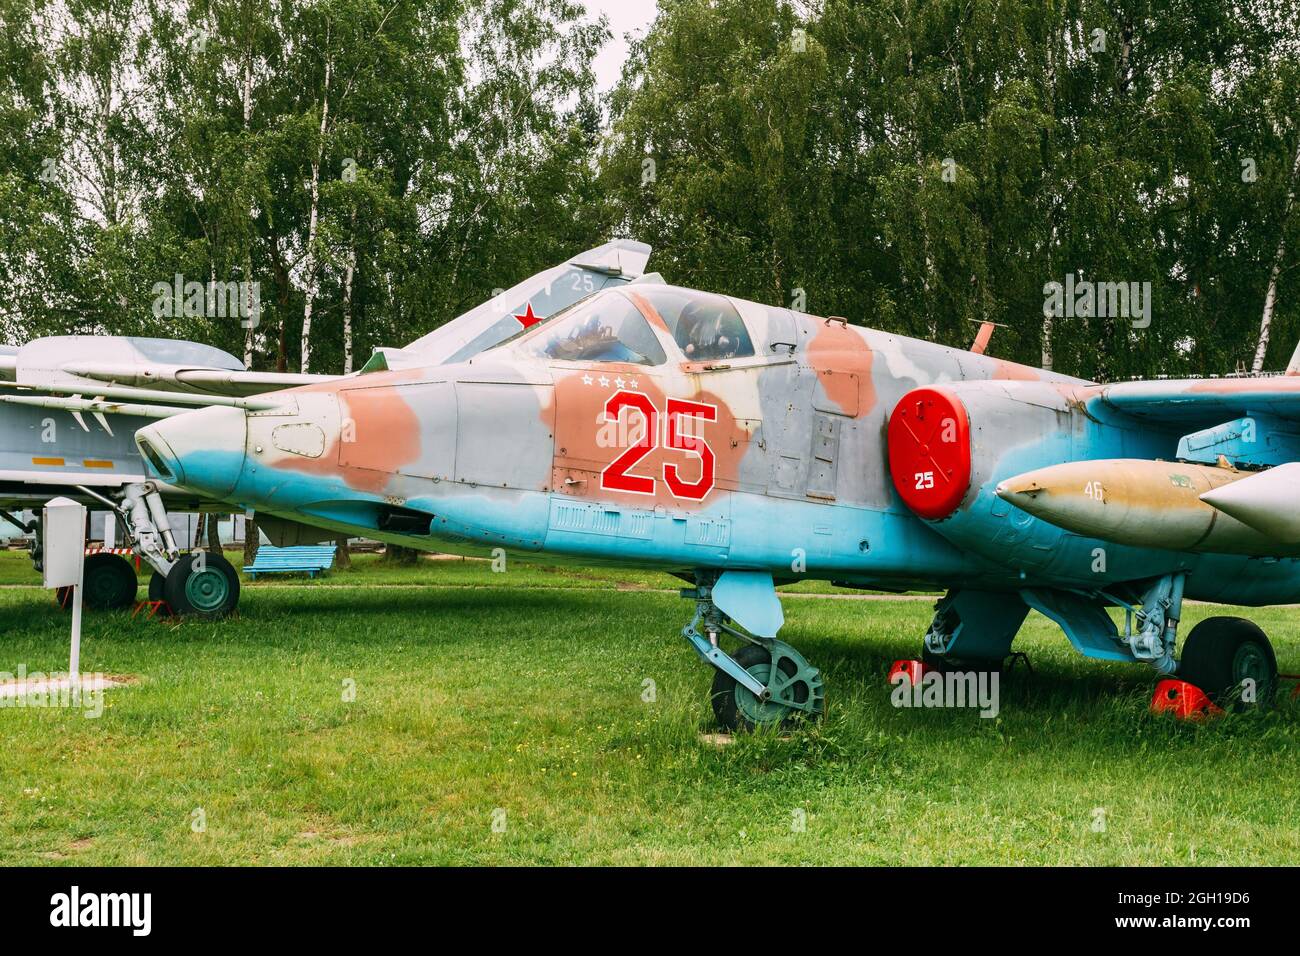 Russian Soviet Armoured Military Subsonic Attack Aircraft Fighter-bomber Stands At Aerodrome. Plane Designed To Provide Close Air Support For Troops Stock Photo